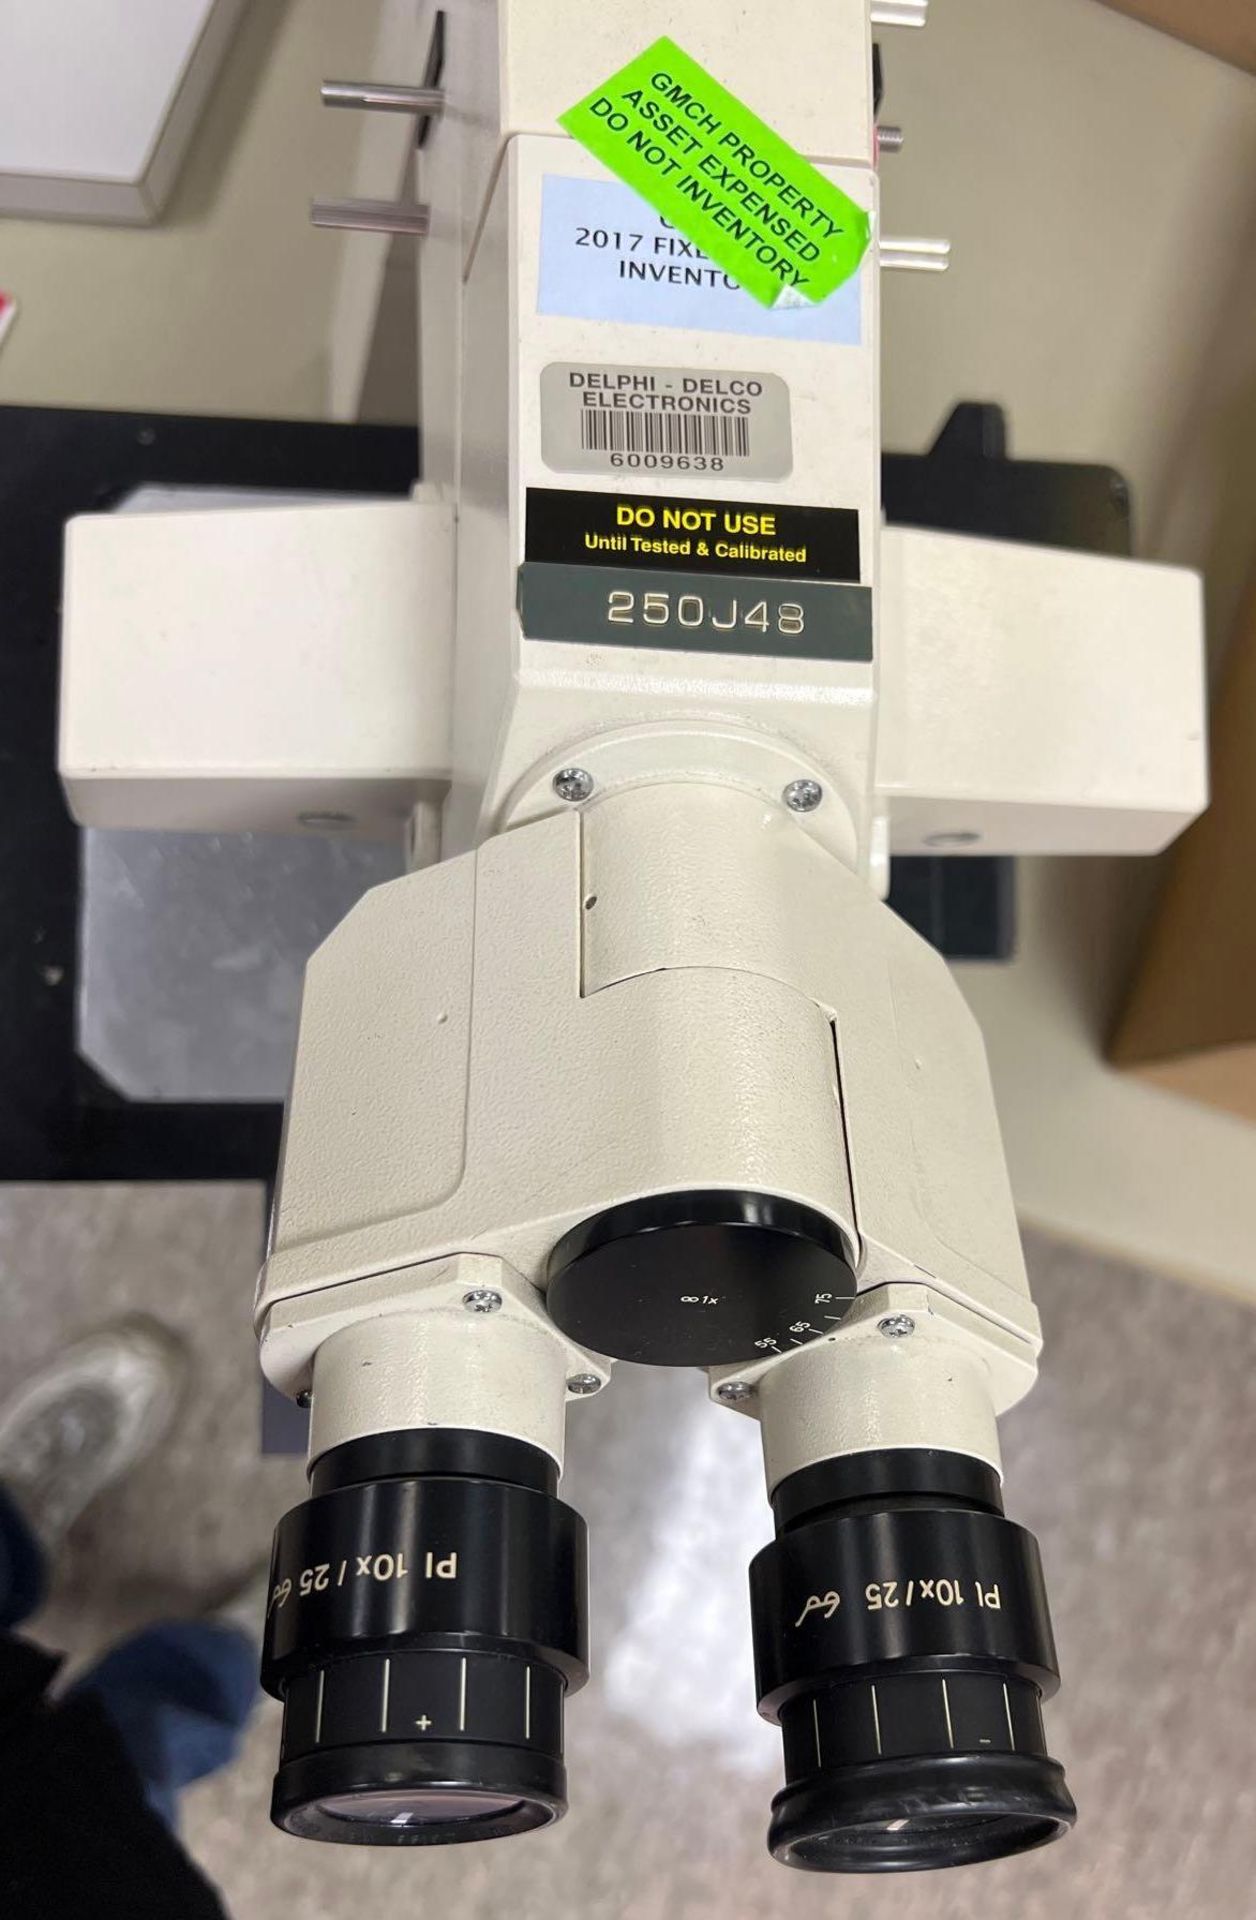 Zeiss Axioscope Light-Section Microscope - Image 3 of 5